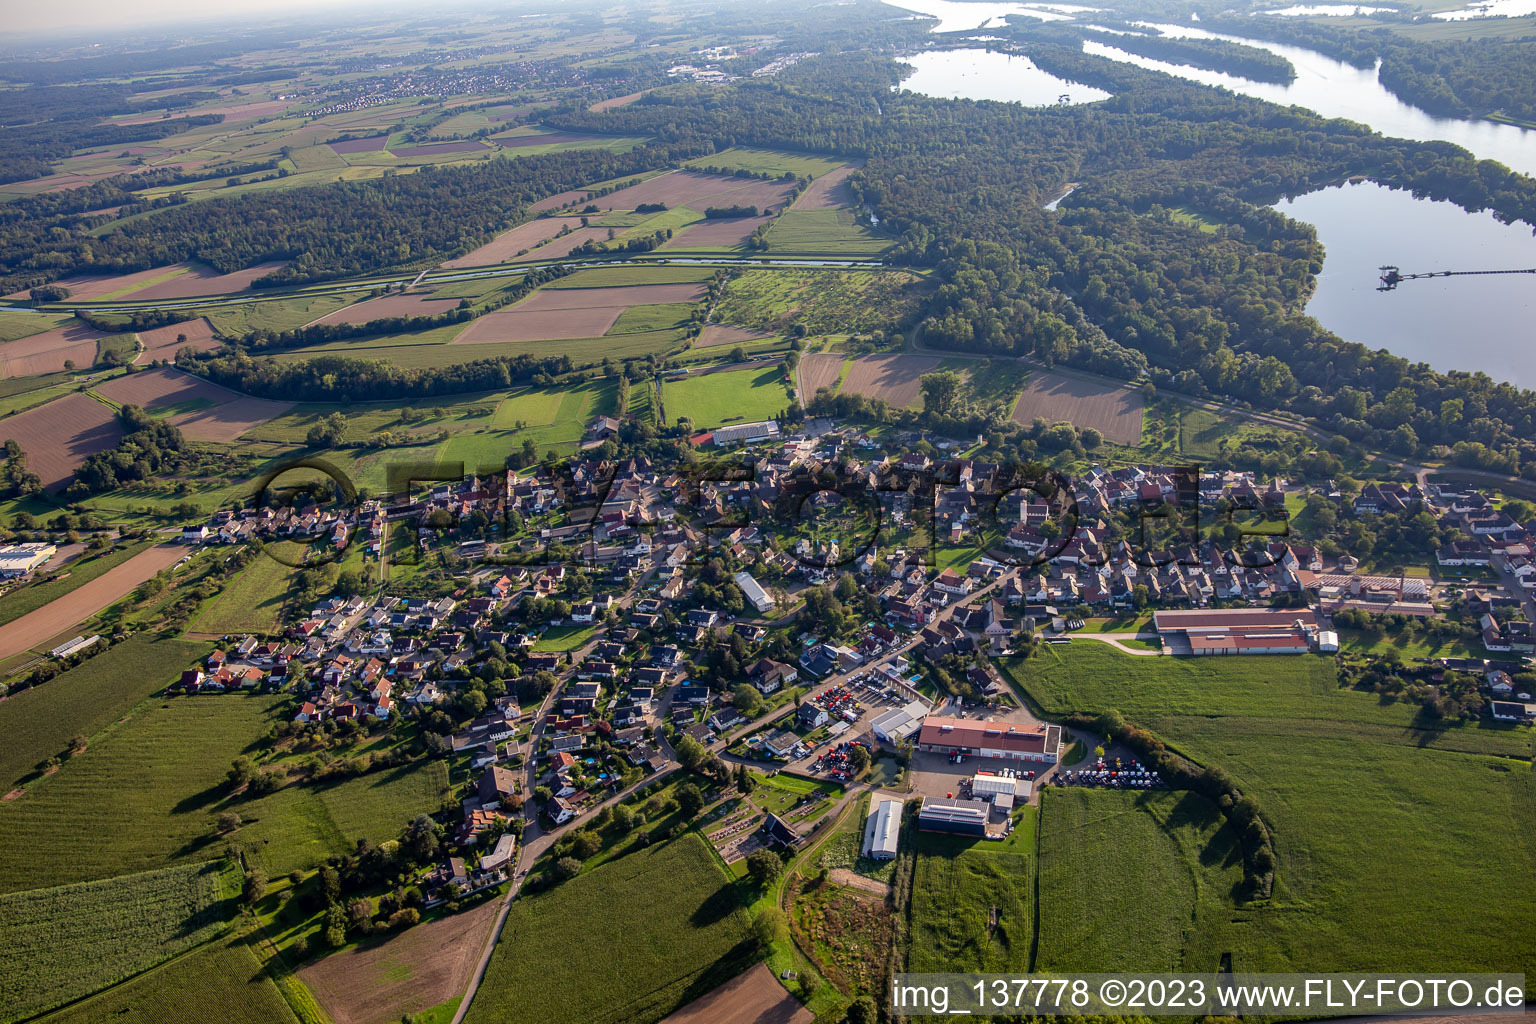 From the north in the district Helmlingen in Rheinau in the state Baden-Wuerttemberg, Germany